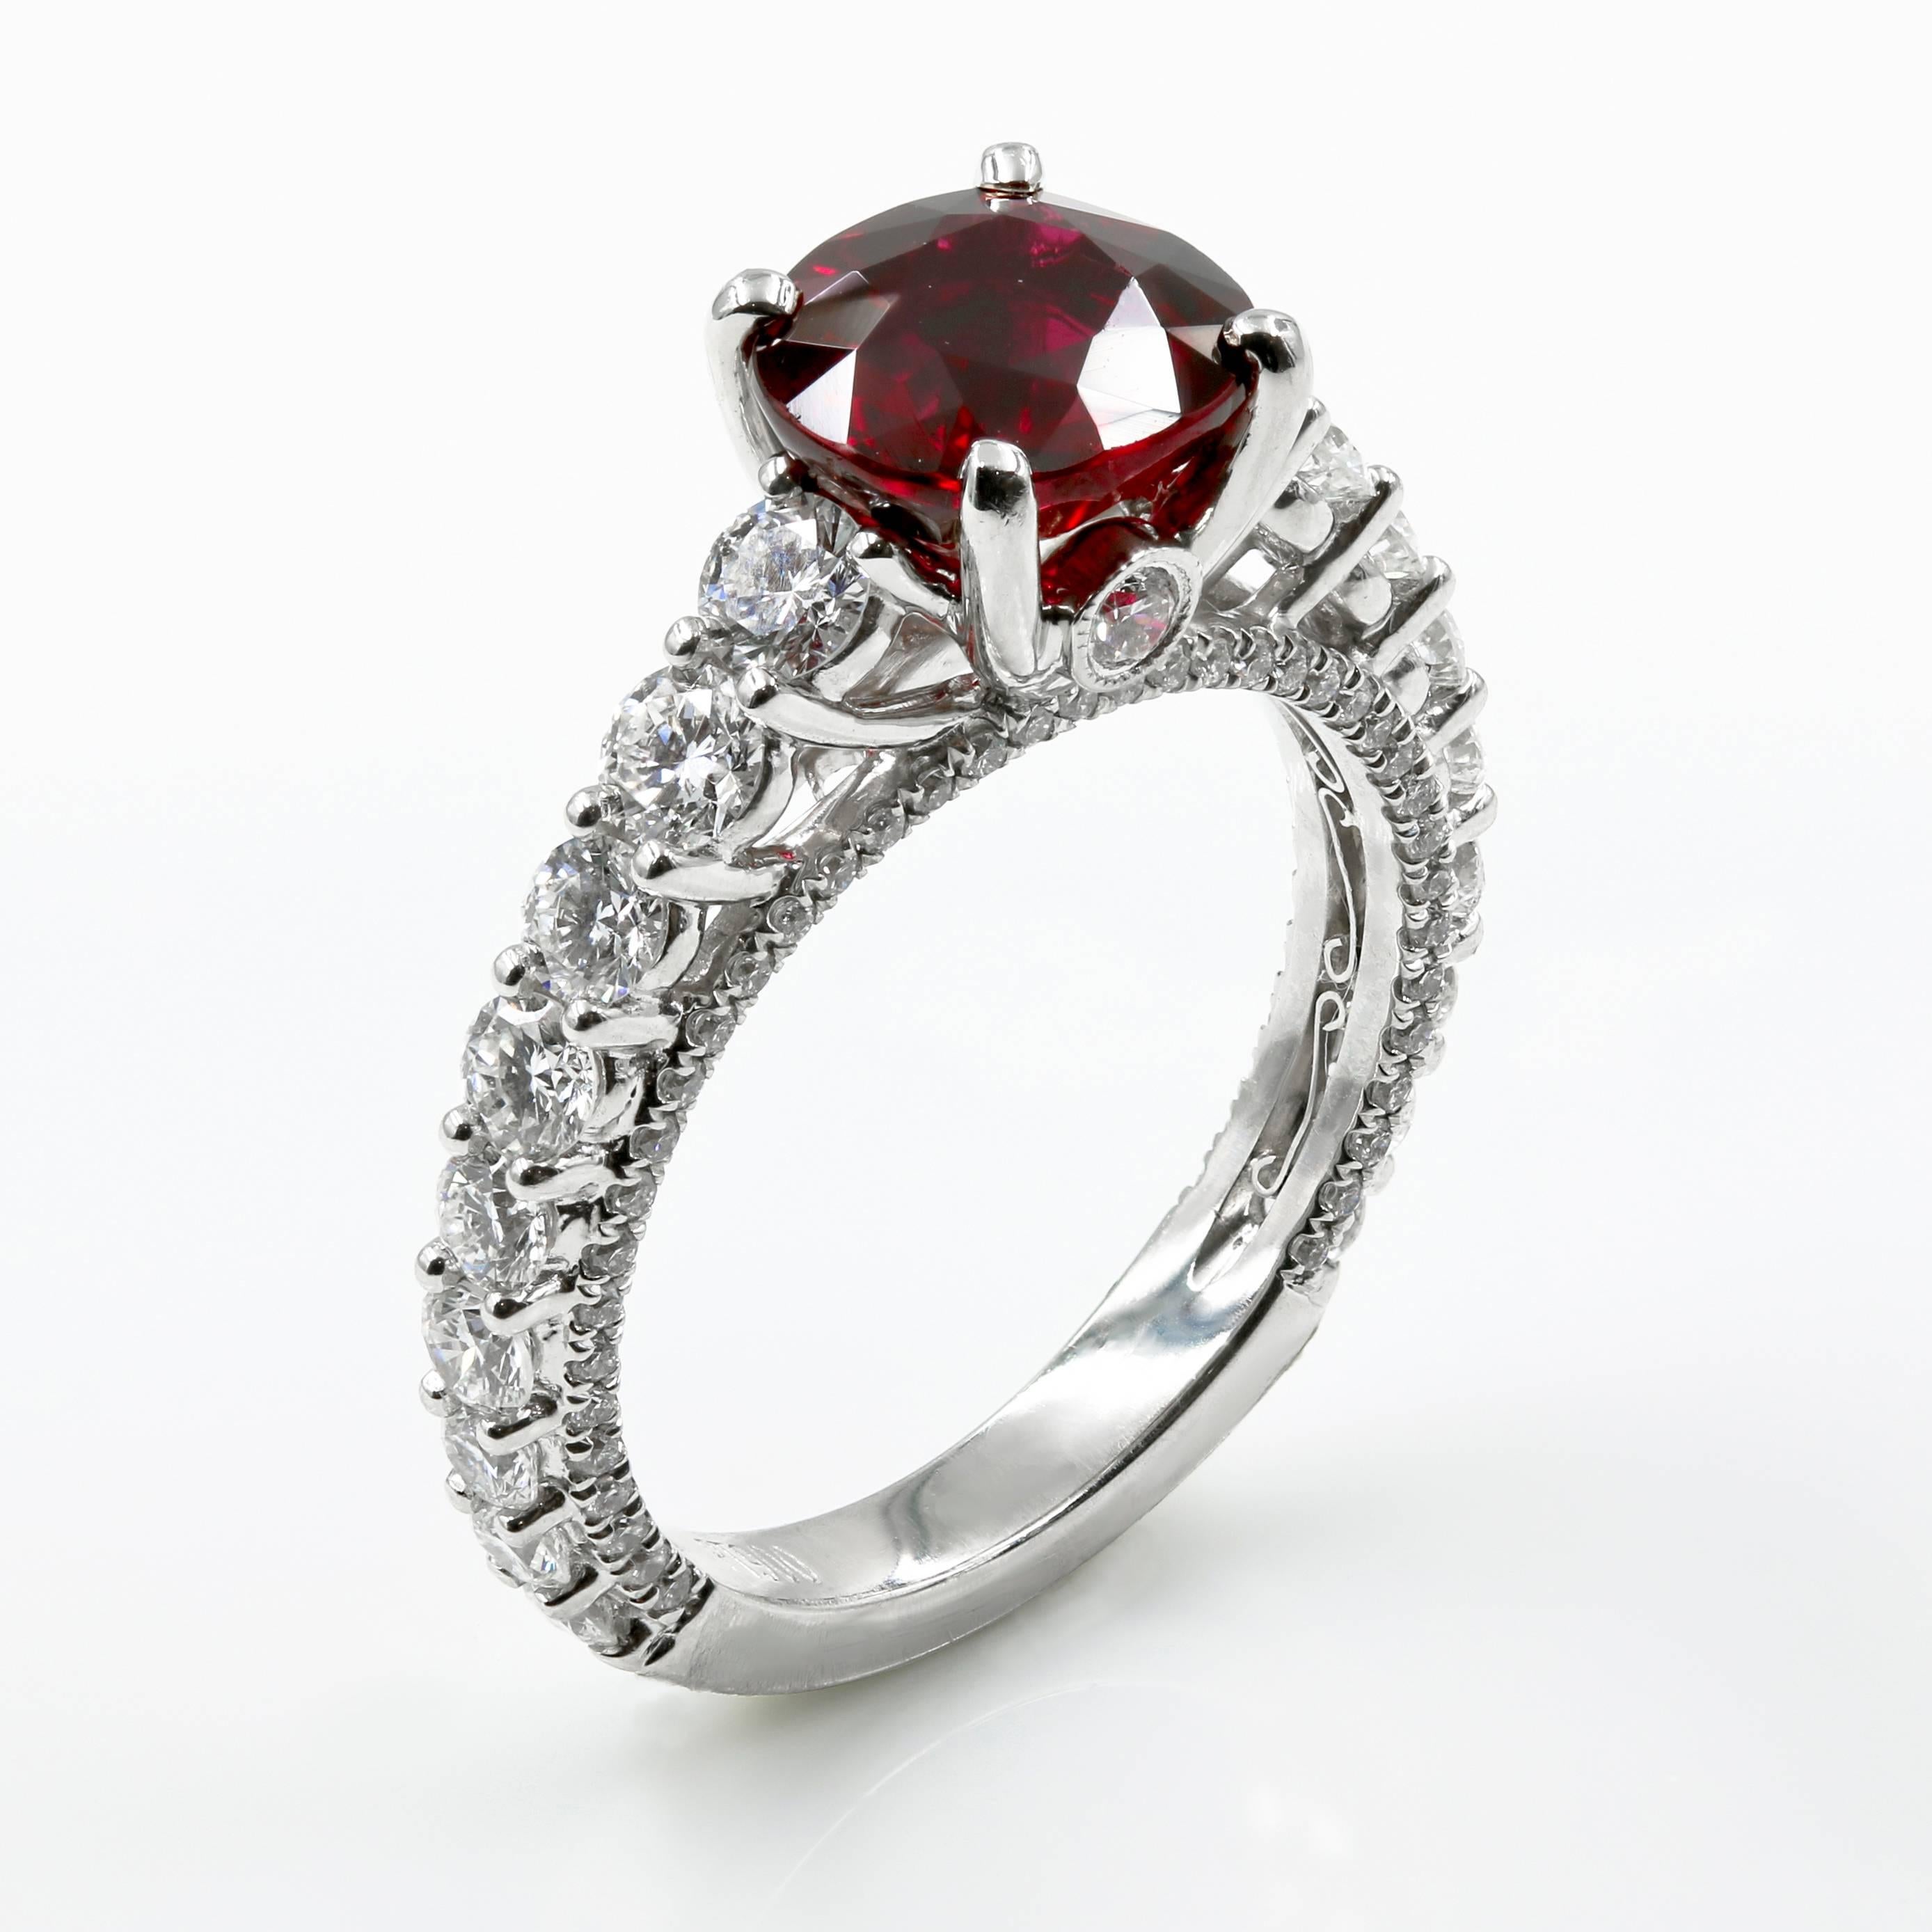 This exquisite ruby & diamond ring features a Natural Ruby - 2.78cts., 80 round brilliant cut diamonds approx.  0.25ct. tw., and 20 round brilliant cut diamonds approx. 1.06cts. tw. -The ring is Platinum (stamped PT900)

The piece comes with